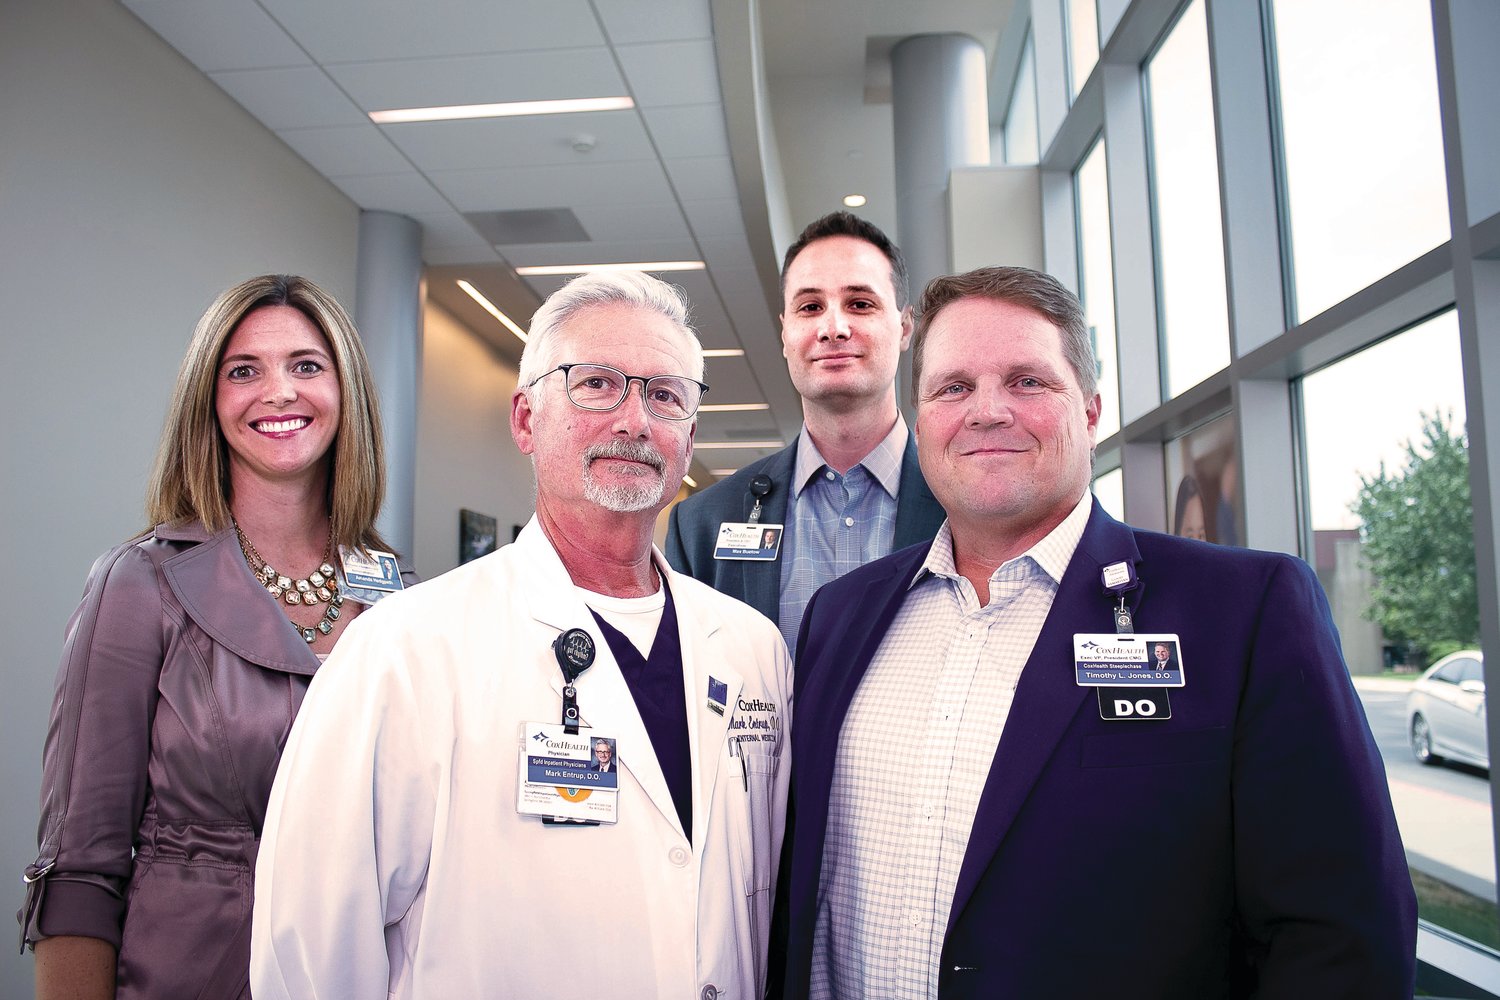 From left: Amanda Hedgpeth, Dr. Mark Entrup, Max Buetow and Dr. Tim Jones